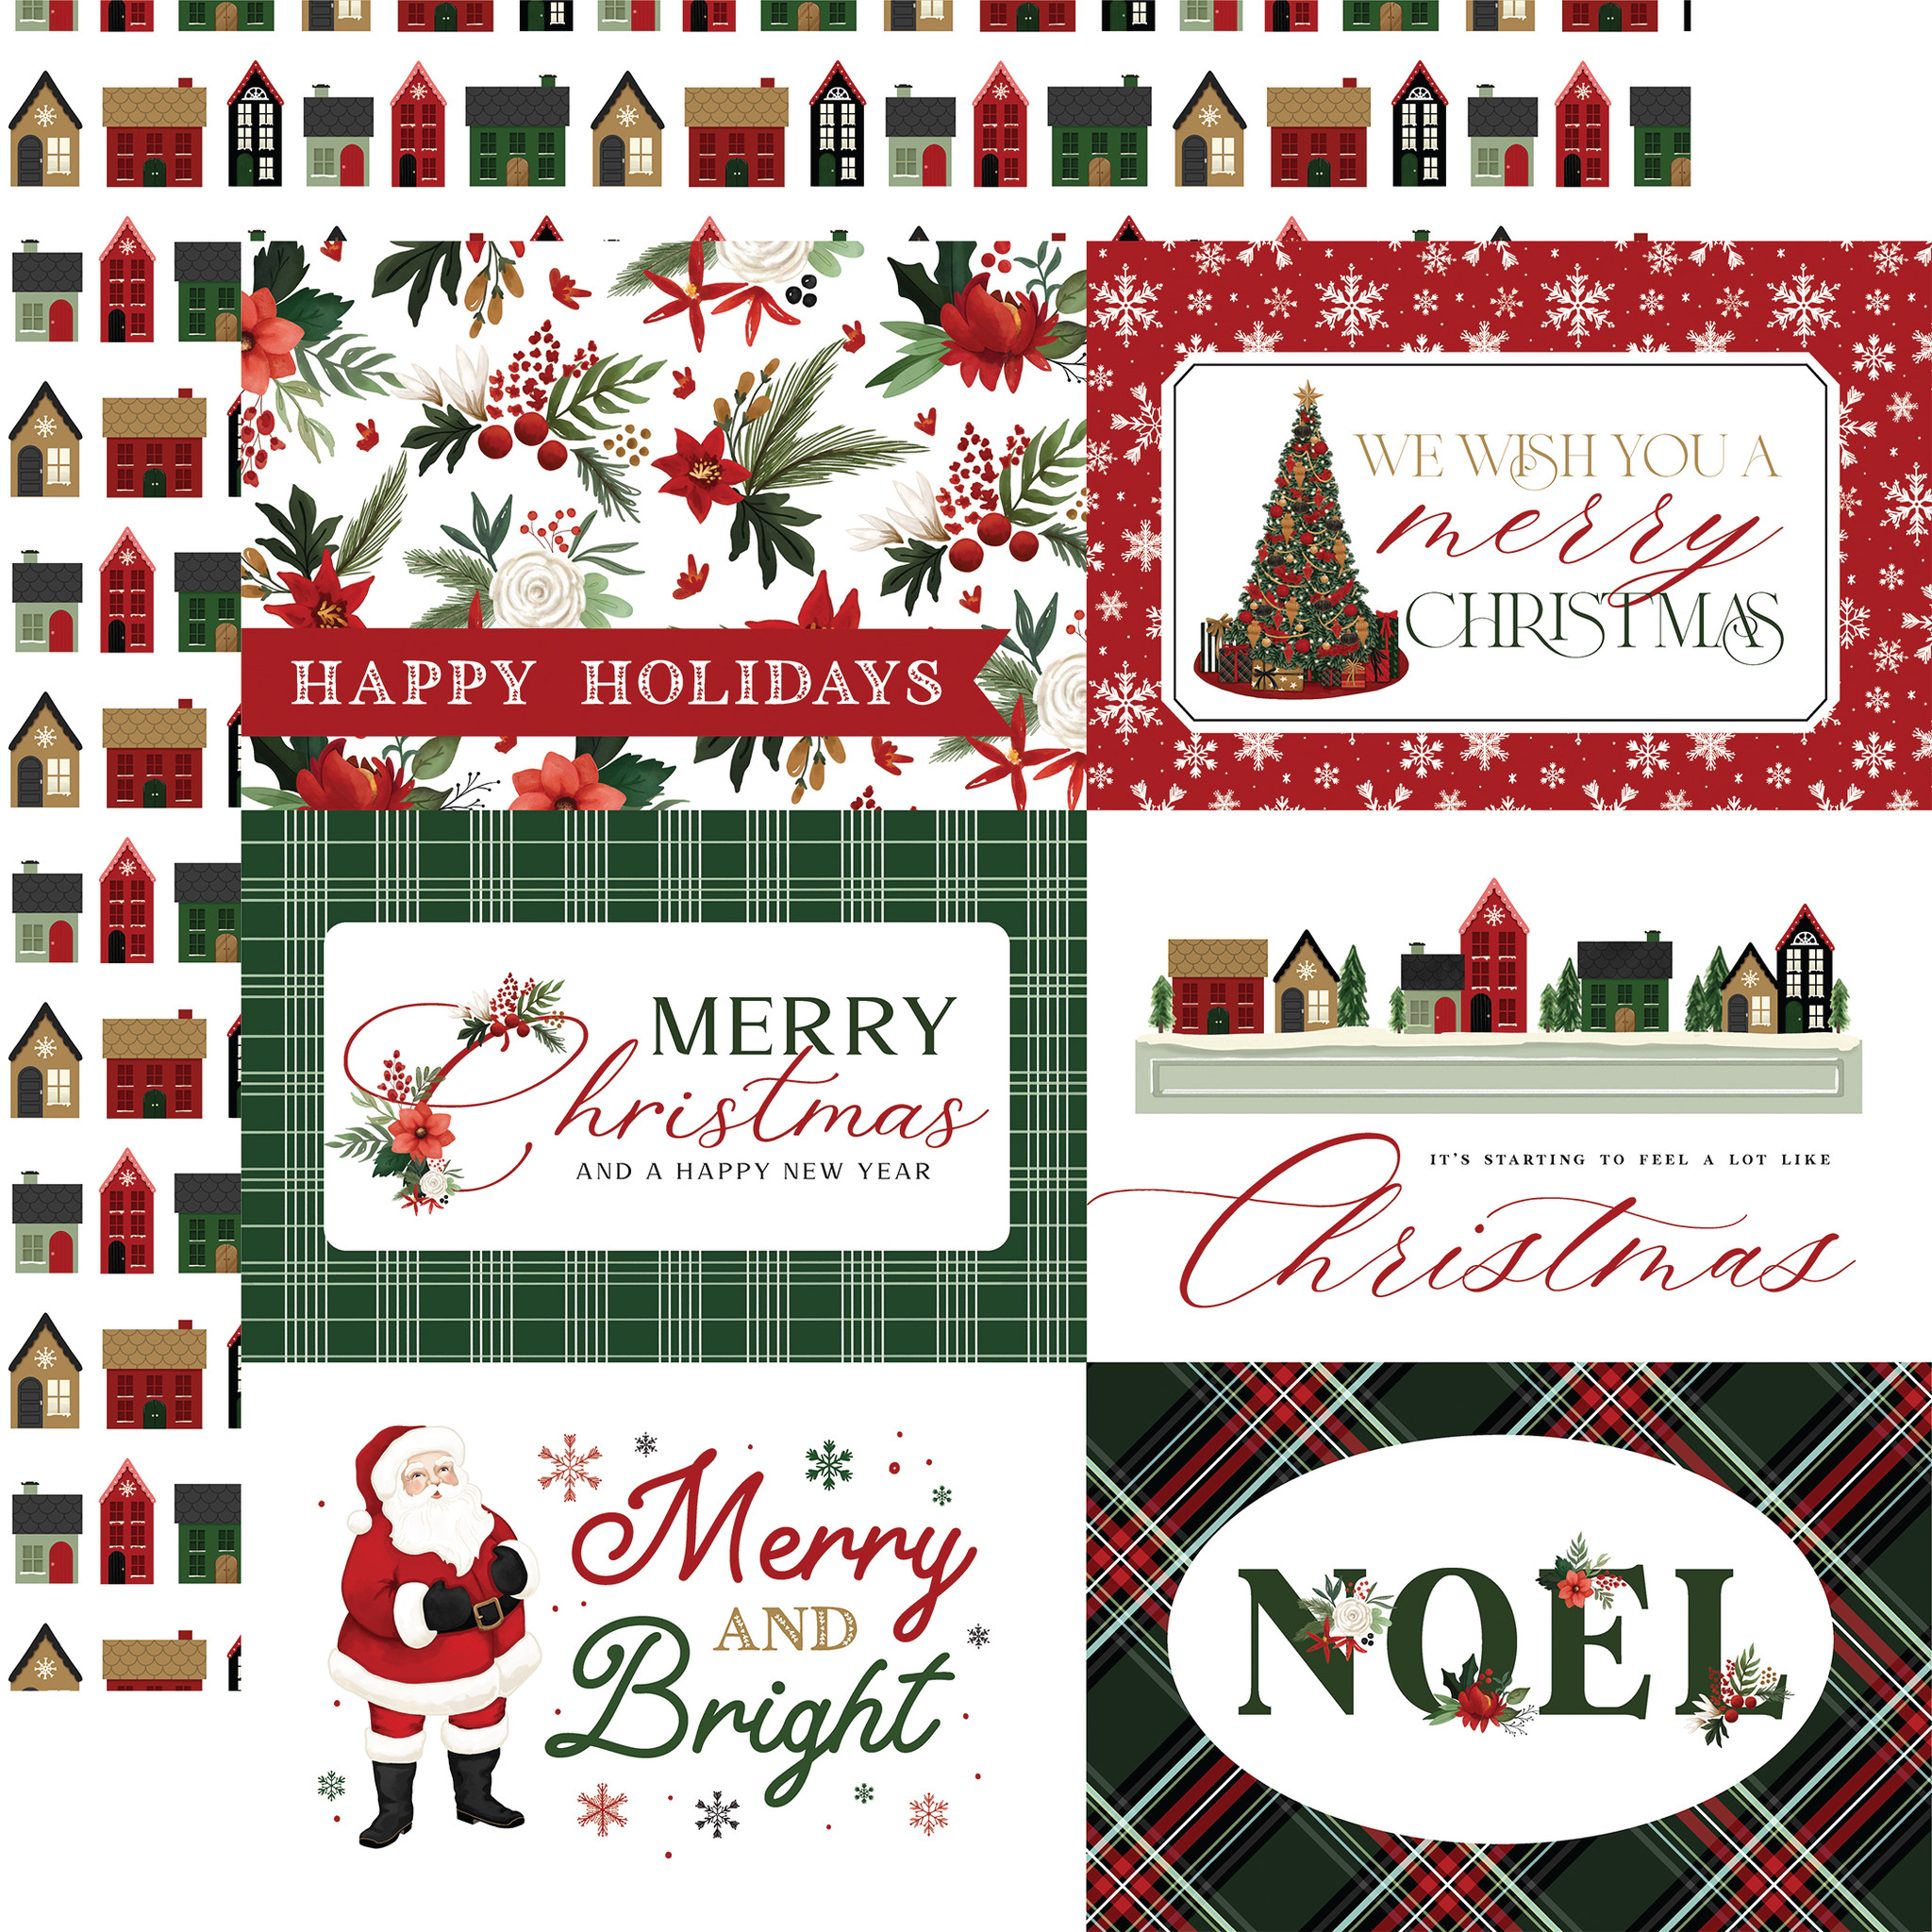 A Wonderful Christmas: Multi Journaling Cards 12x12 Patterned Paper - Echo  Park Paper Co.